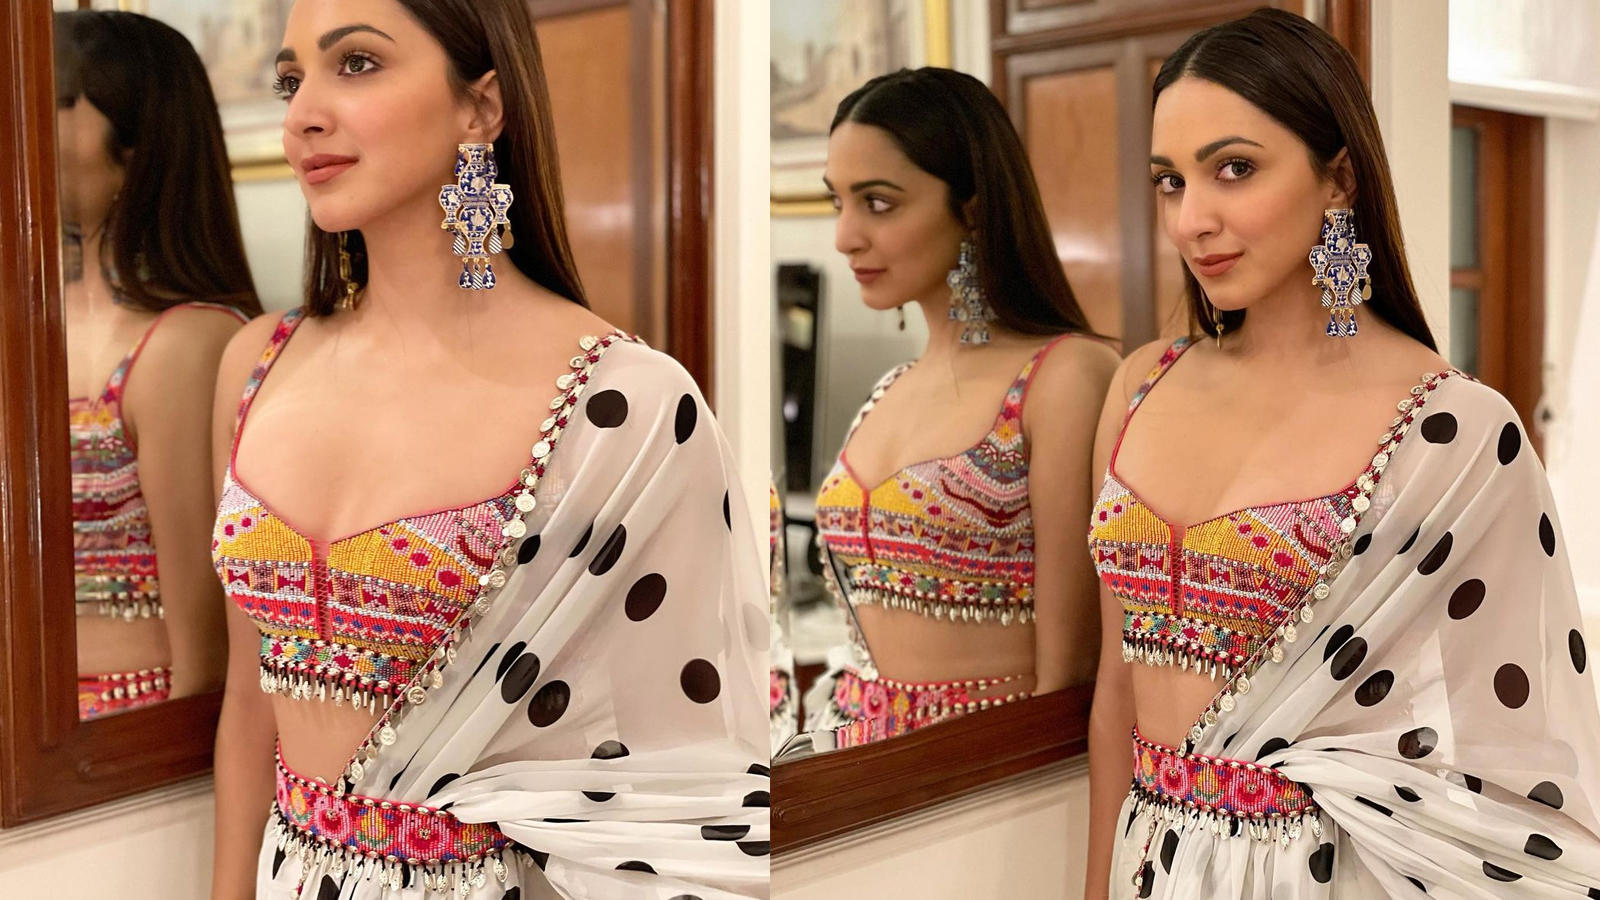 Kiara Advani shells out major Diwali outfit inspiration in her ...